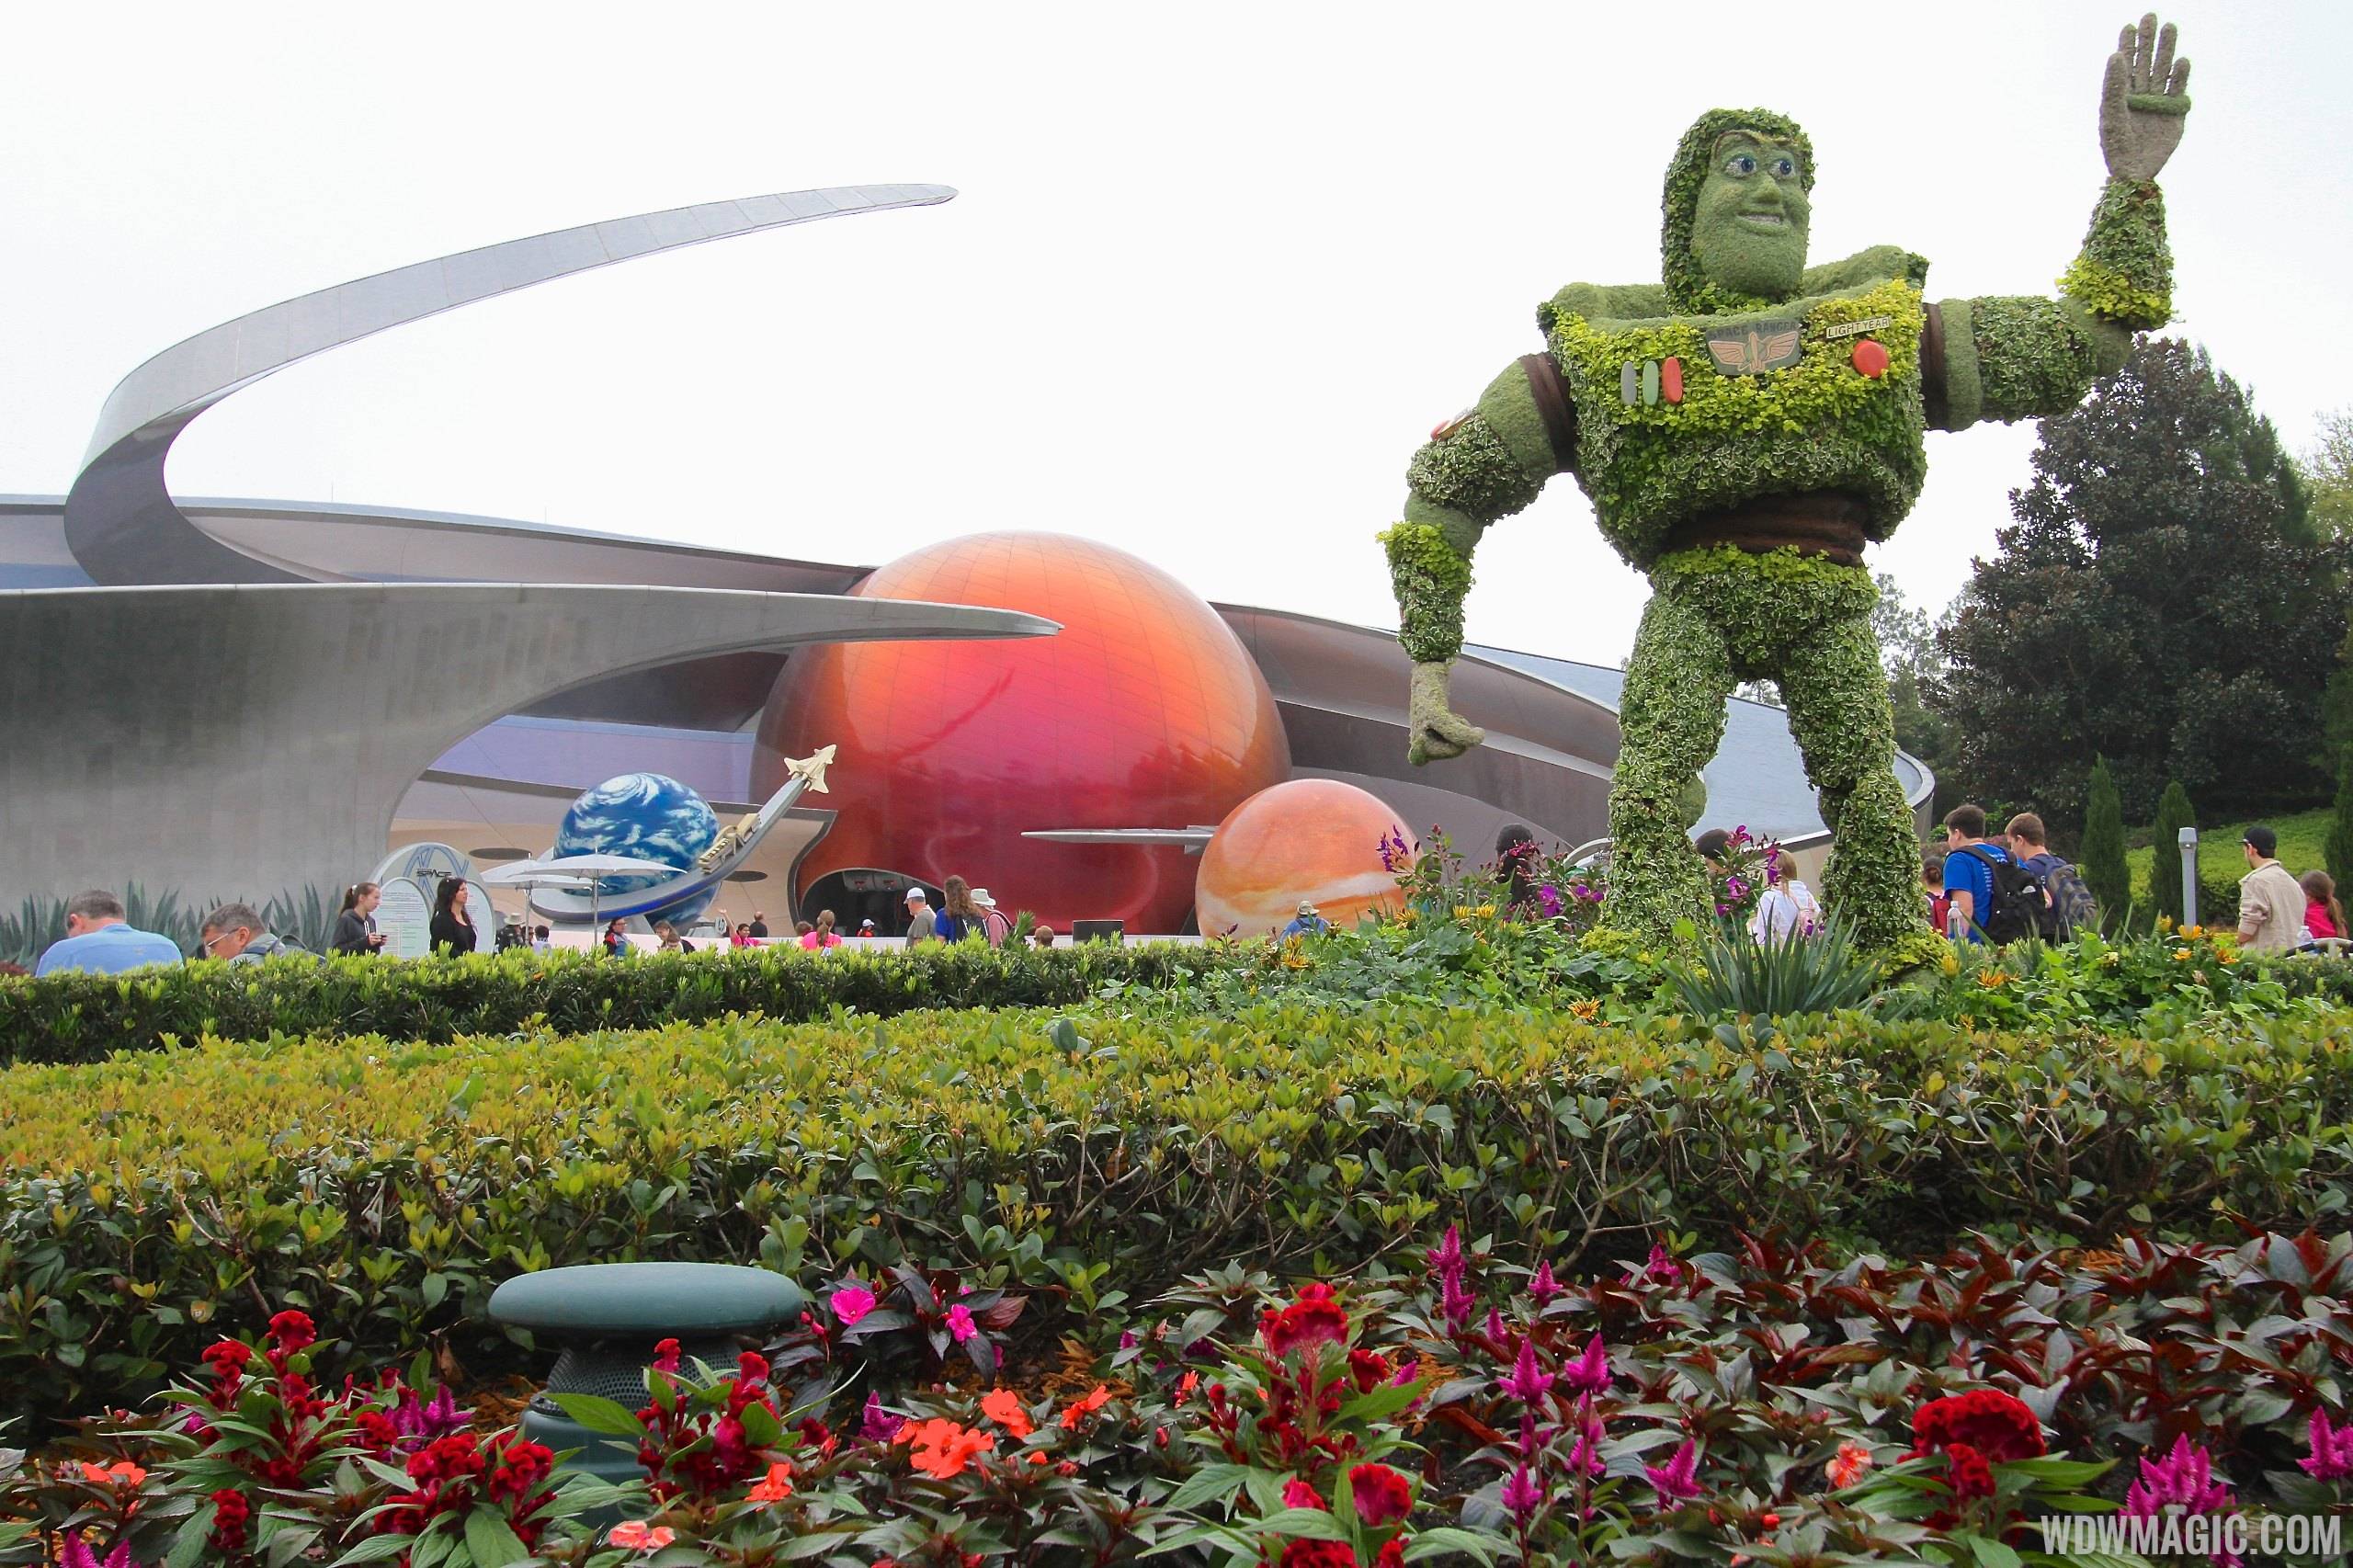 2014 Epcot Flower and Garden Festival - Buzz Lightyear topiary